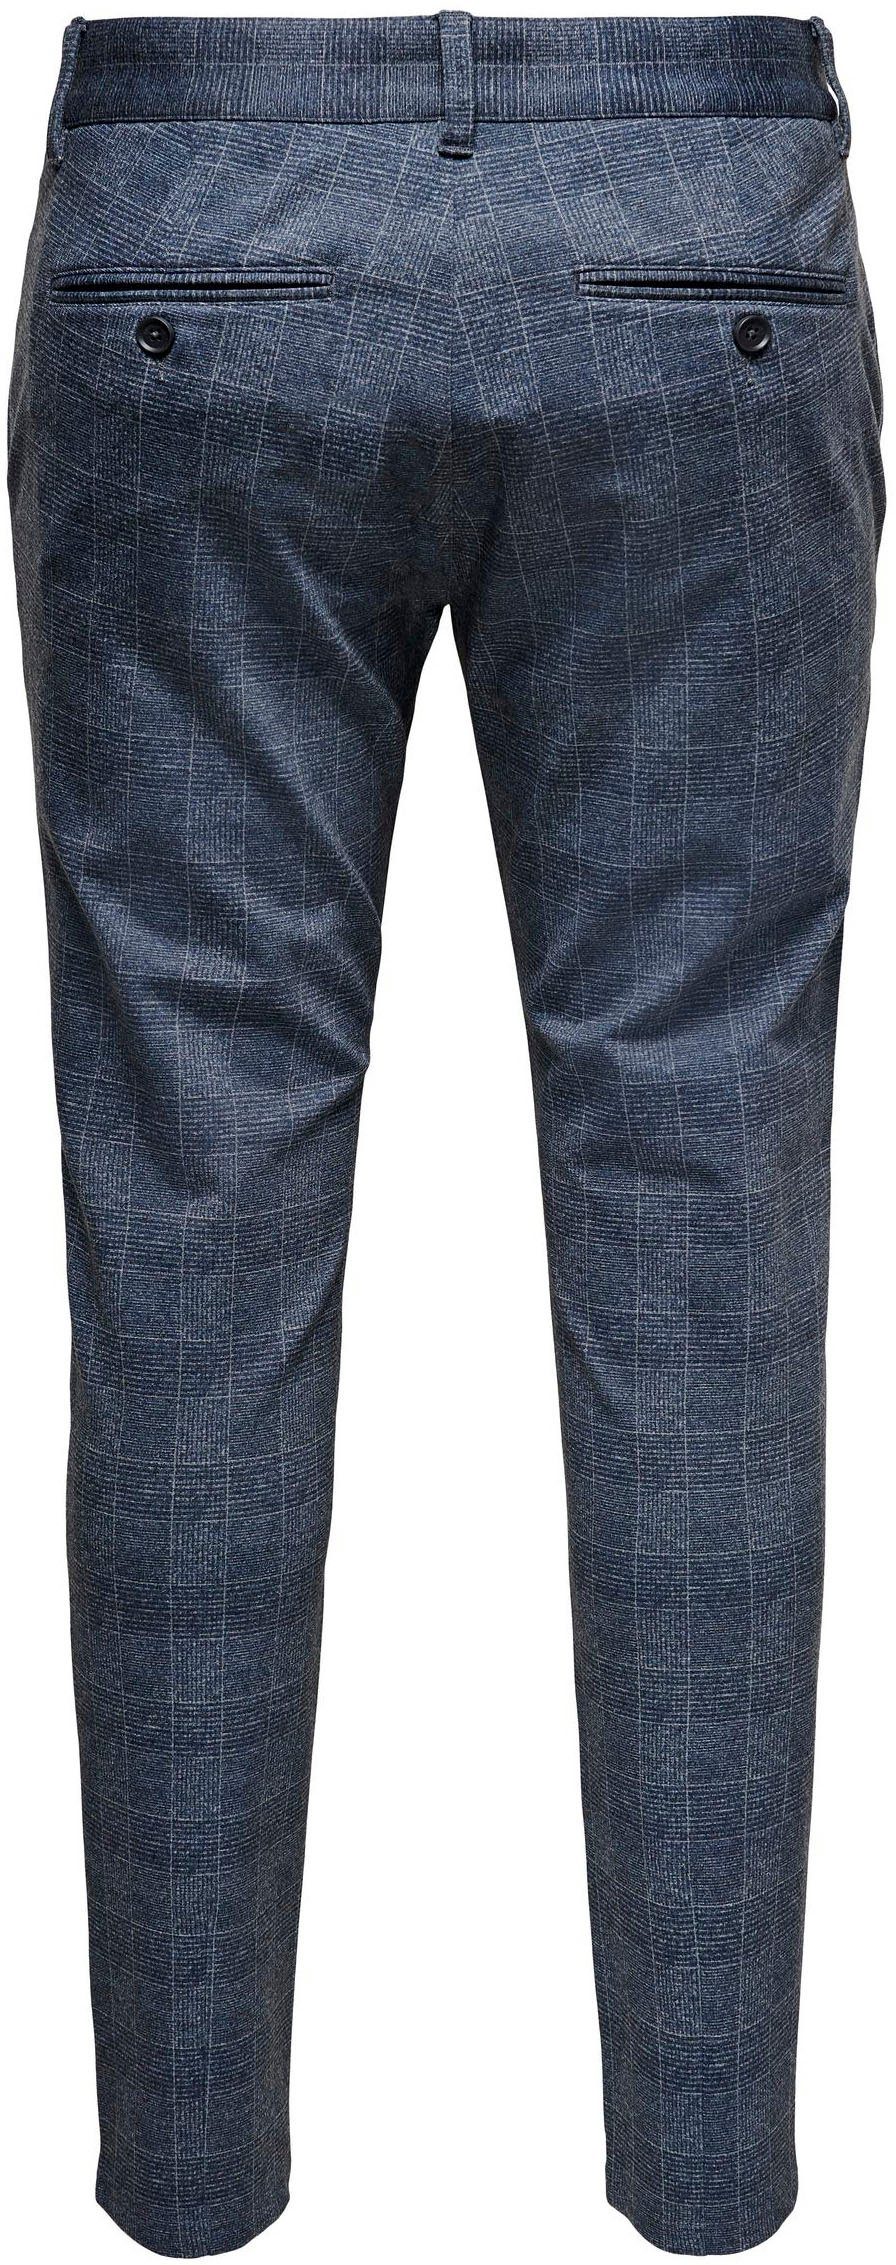 ONLY & SONS Chinohose PANTS CHECK blau kariert MARK